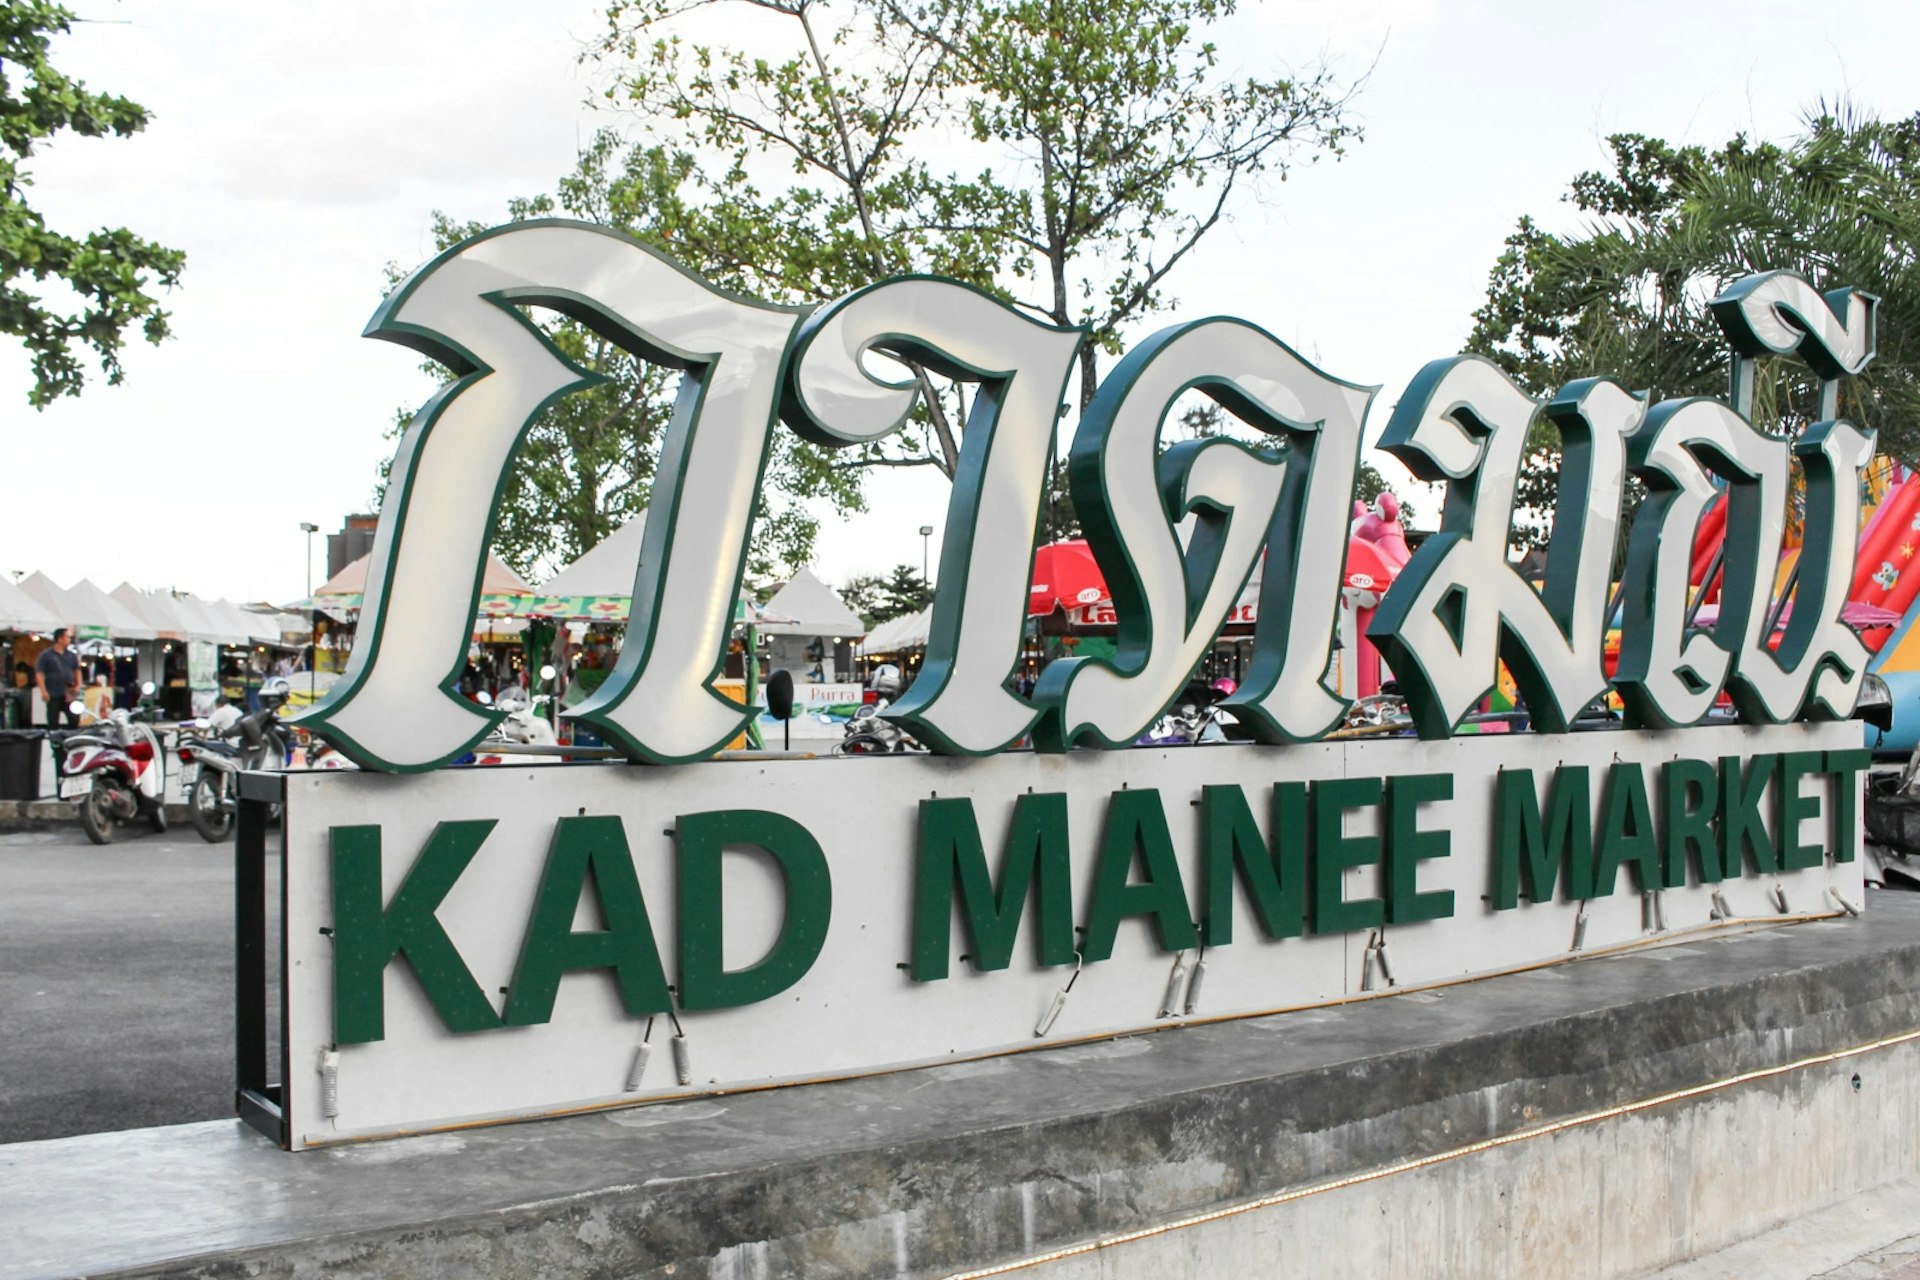 Kad Manee Market sign post in Chiang Mai, Thailand © Alana Morgan / Lonely Planet